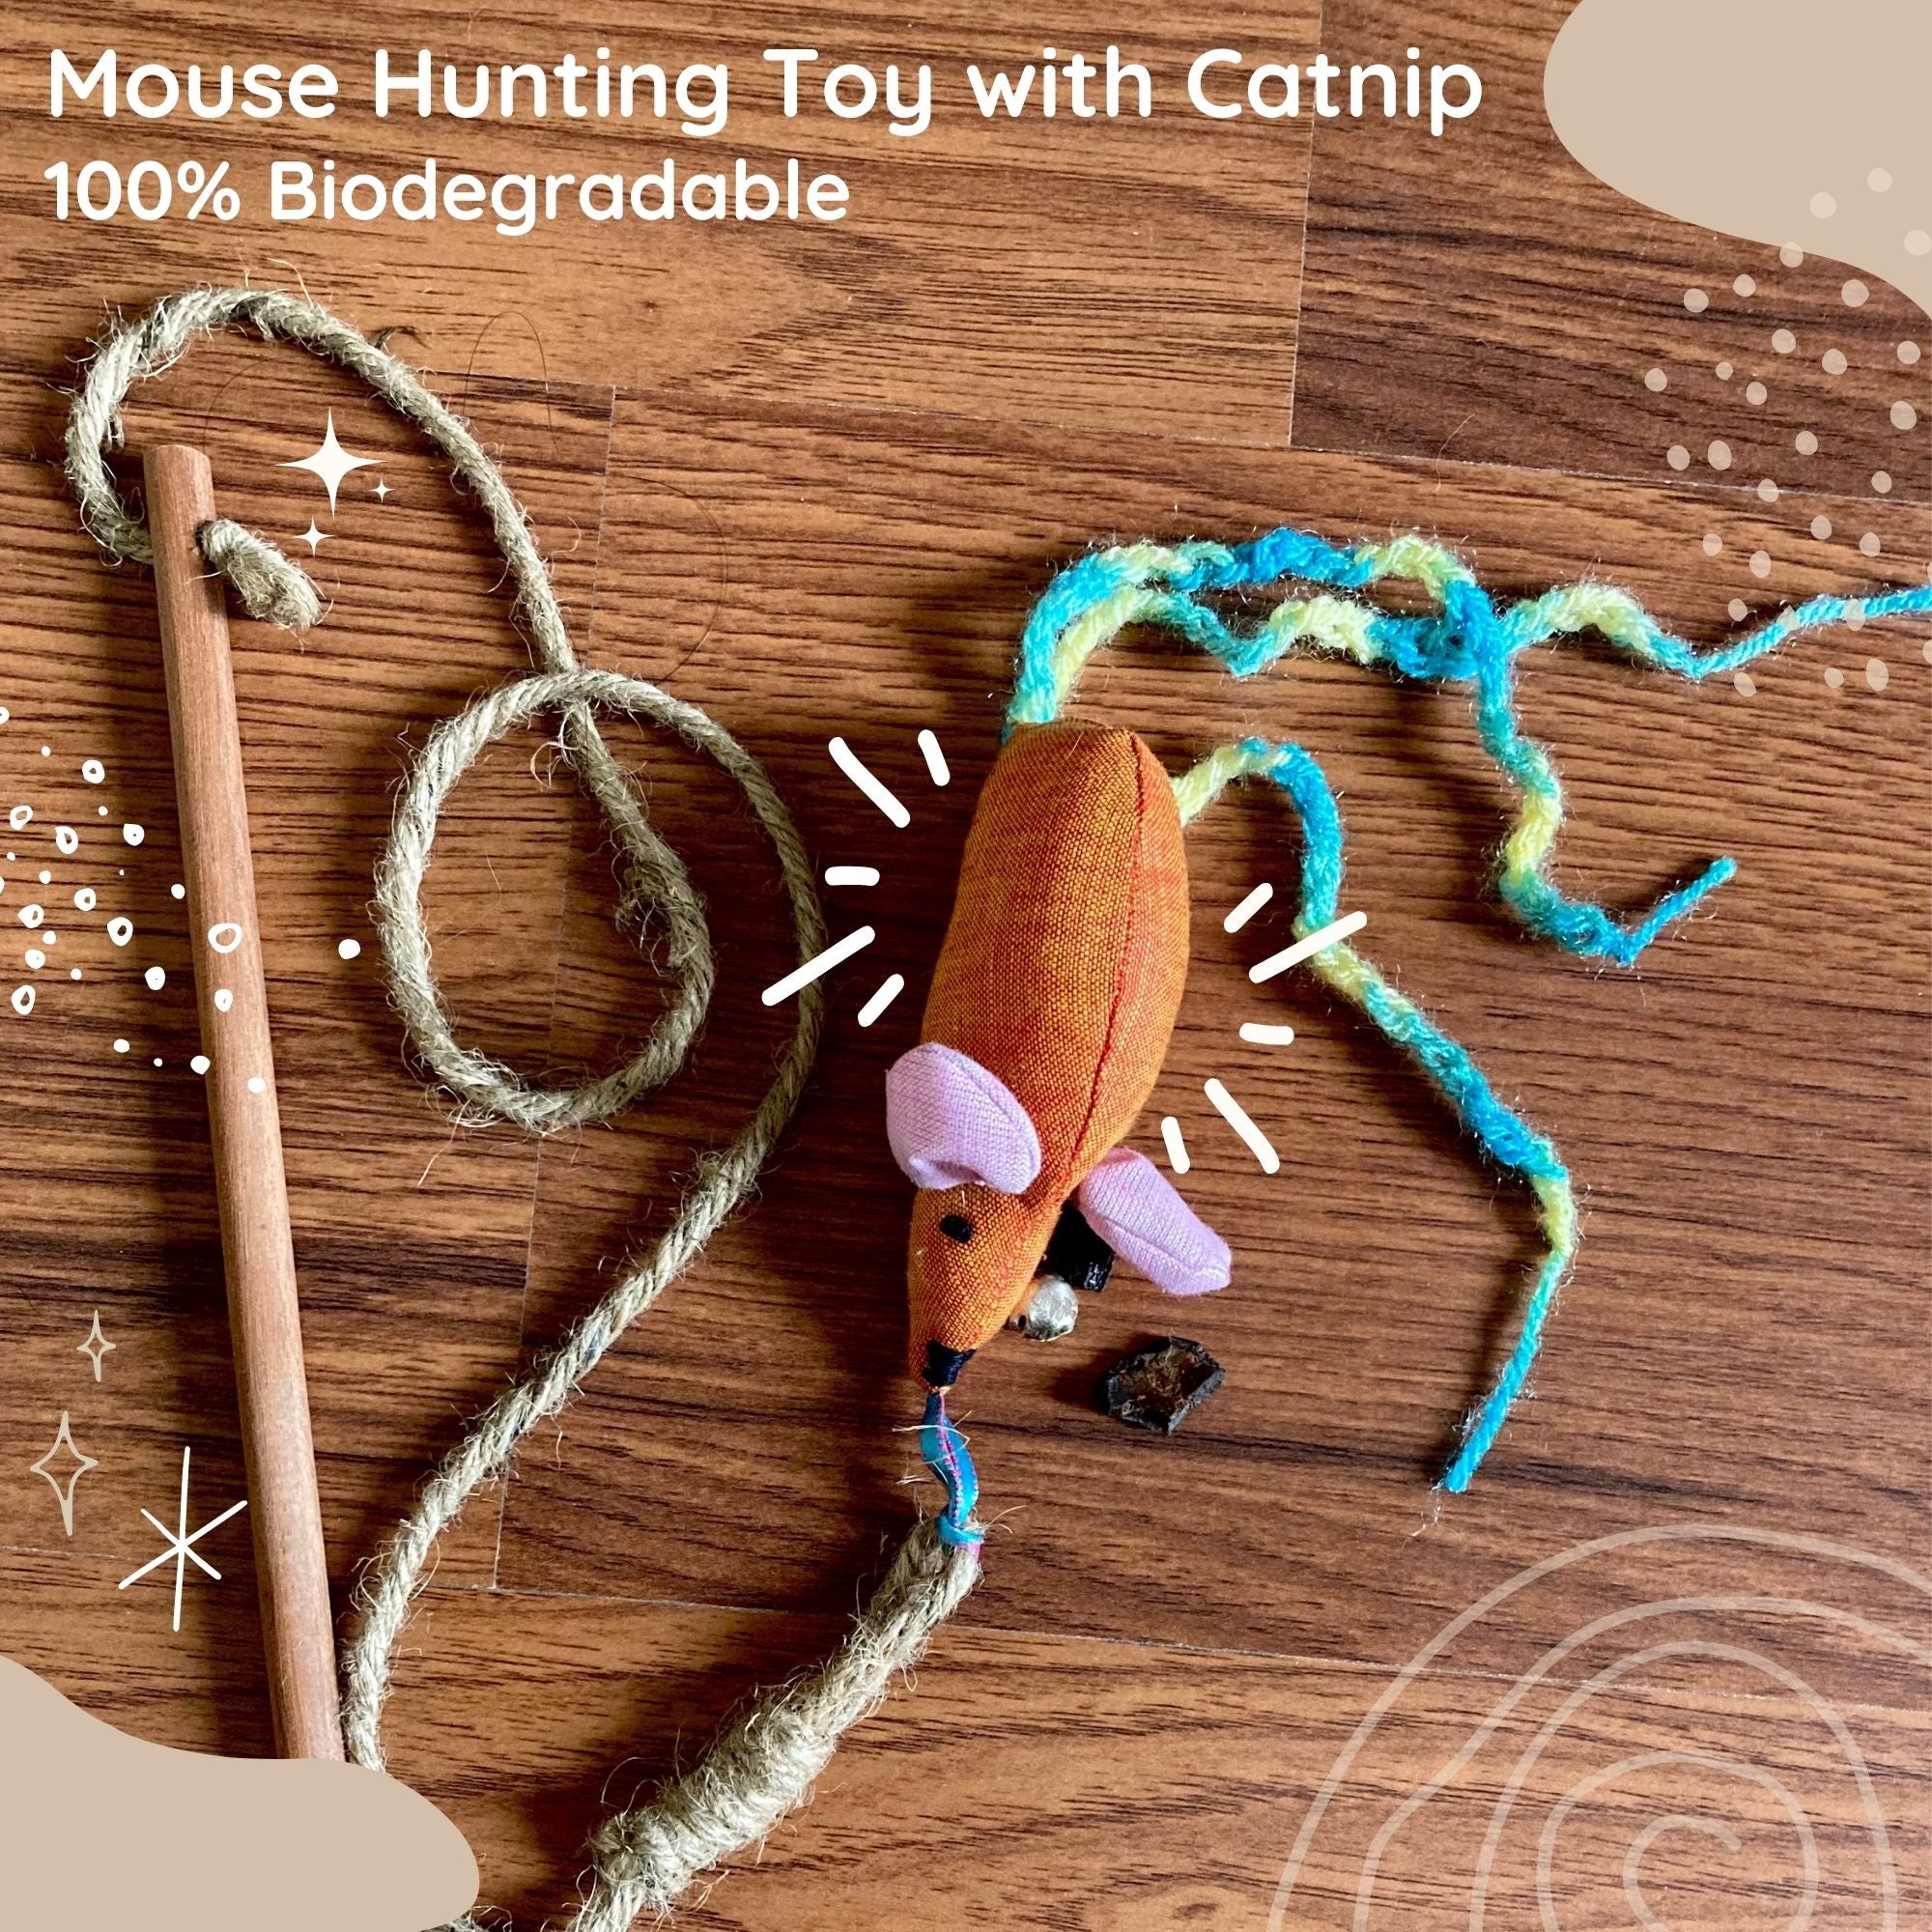 Mouse Hunting Toy with Catnip - 100% Biodegradable